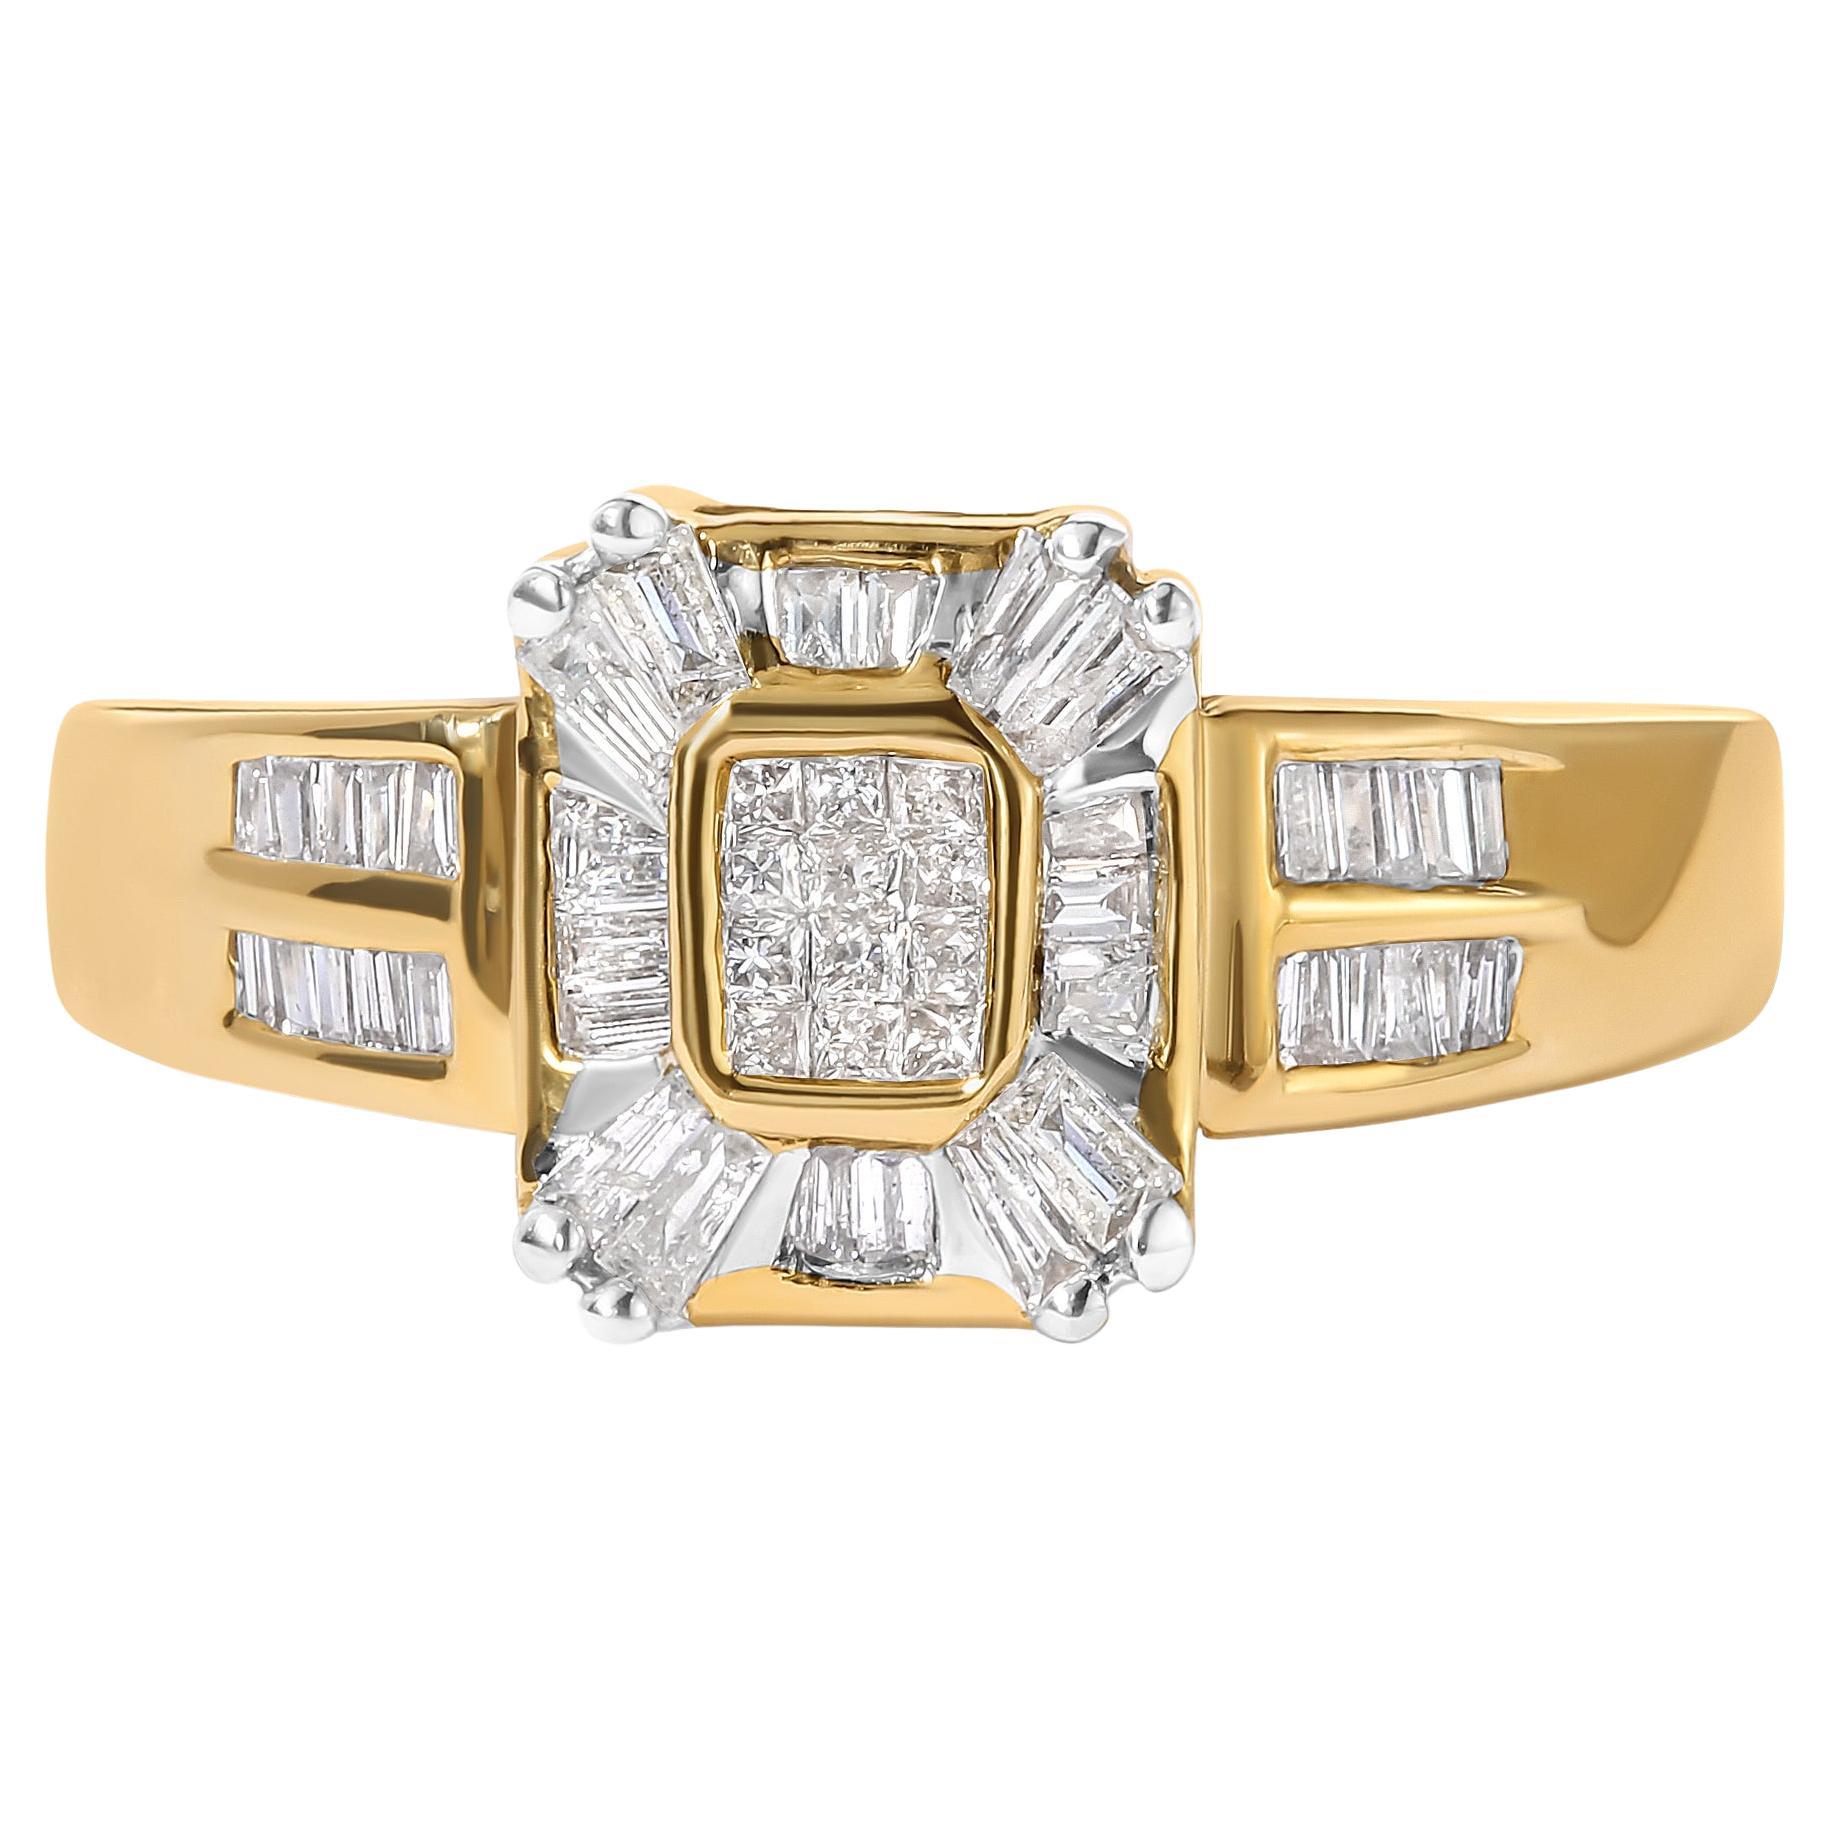 10K Yellow Gold 1/2 Carat Diamond Composite and Halo Ring